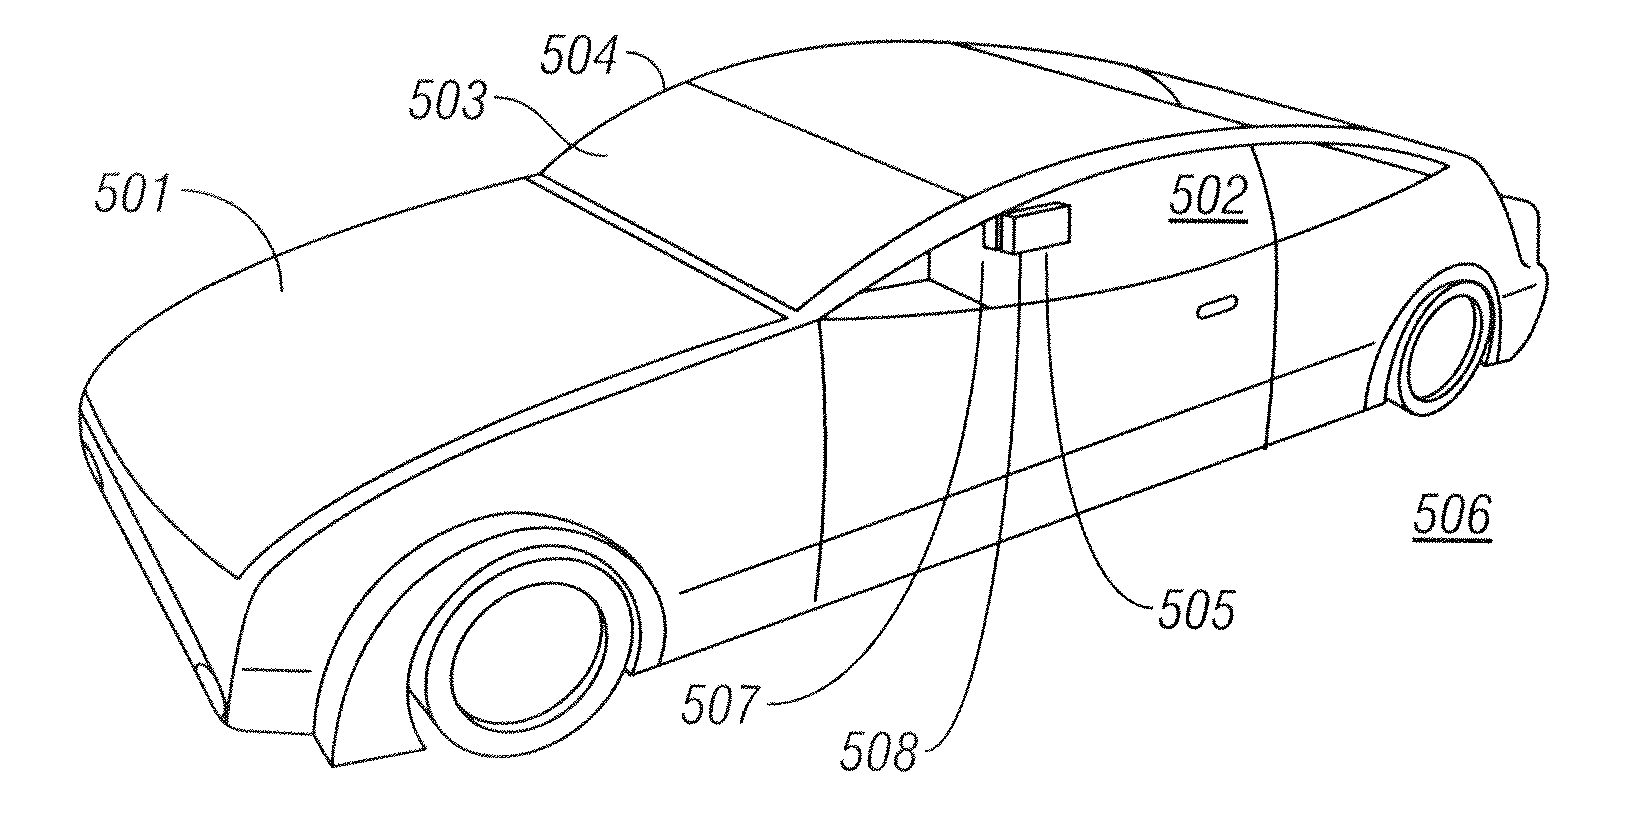 Solar-thermoelectric air-conditioning in vehicles